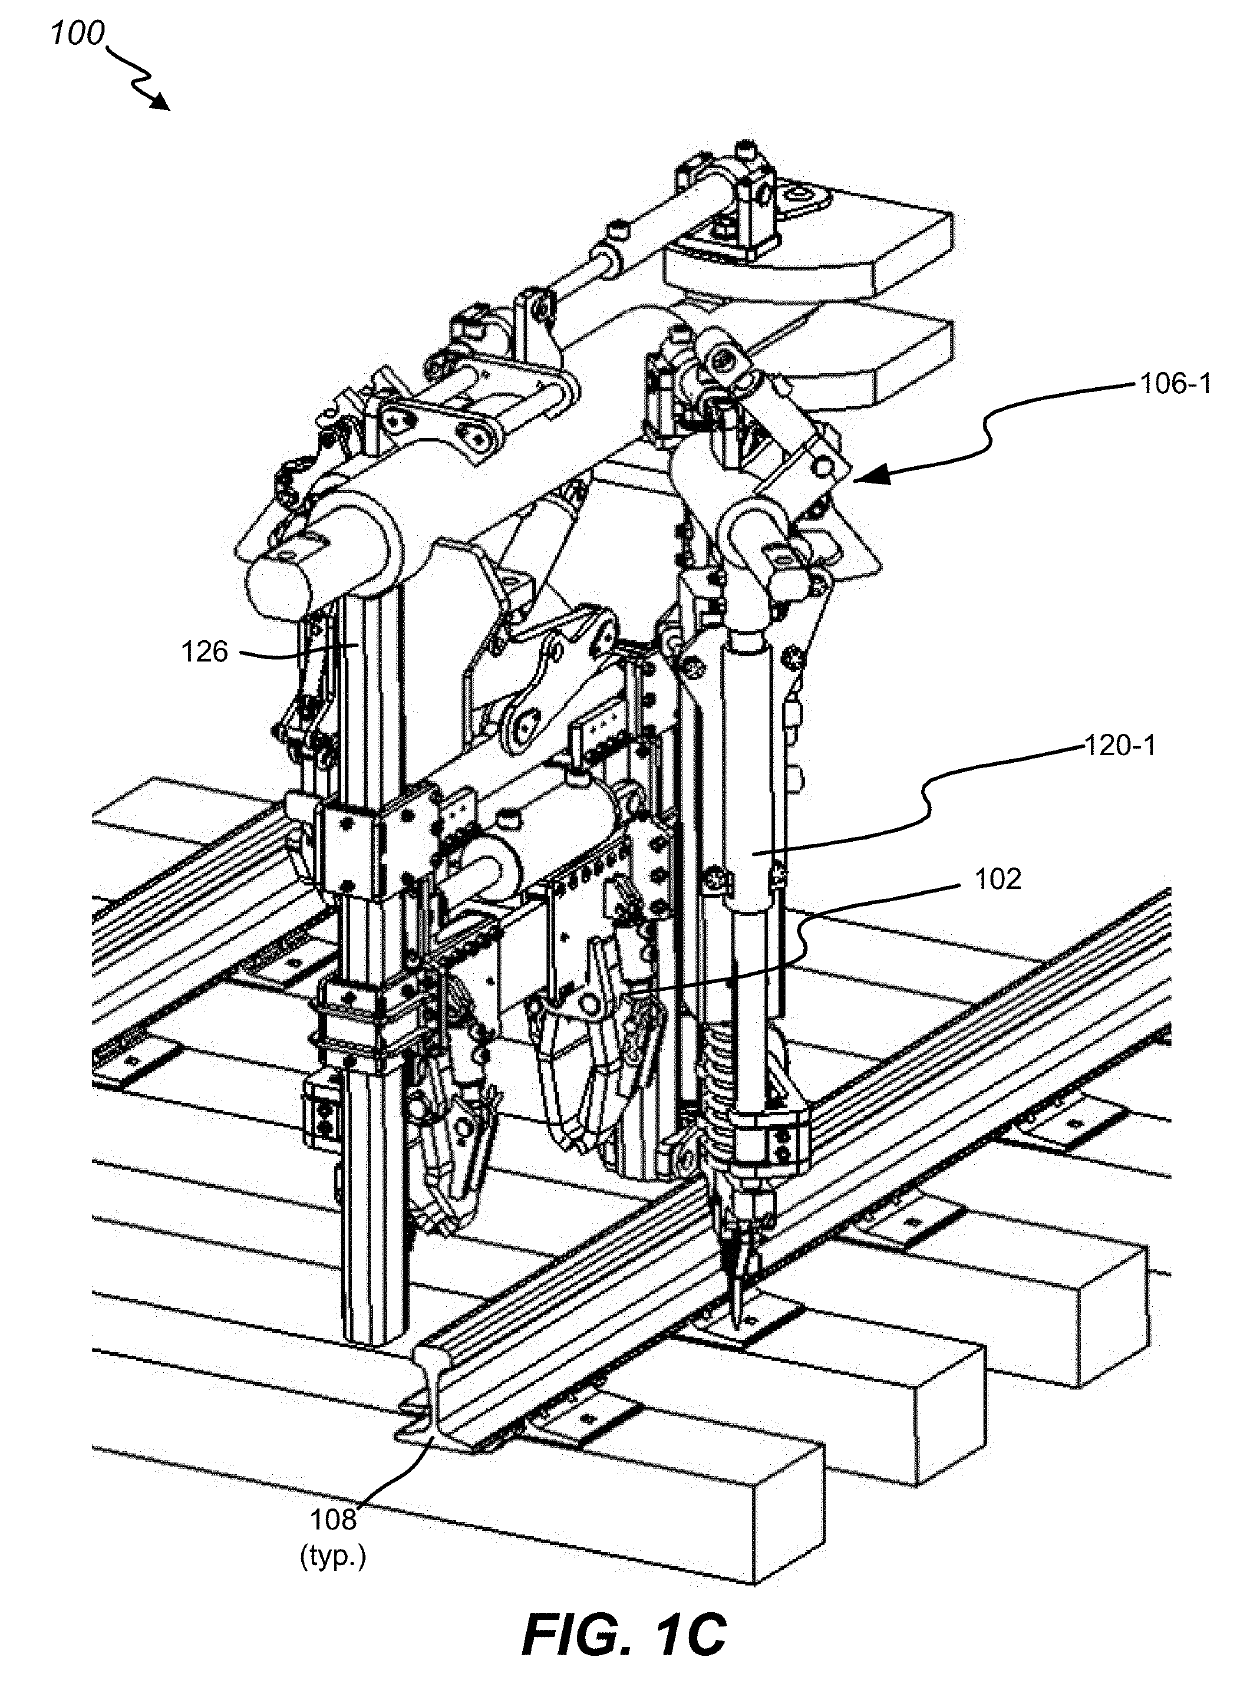 Adaptive railway fastener and anchor installation system